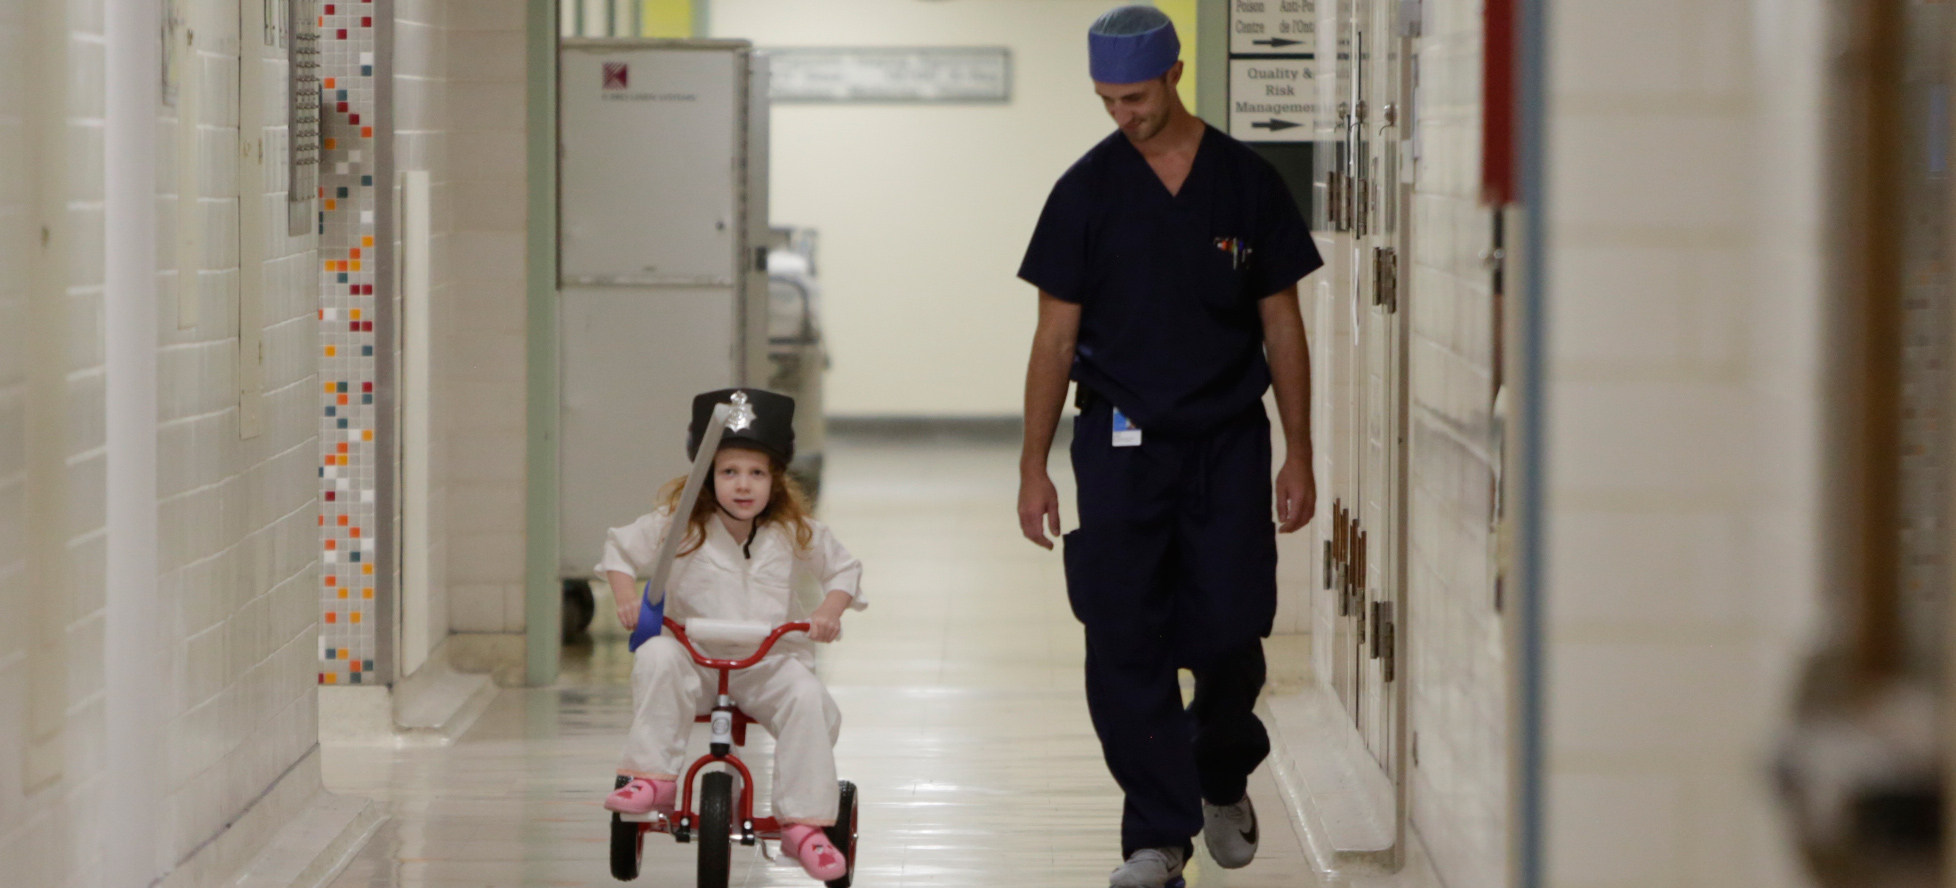 girl riding tricycle down hospital hallway